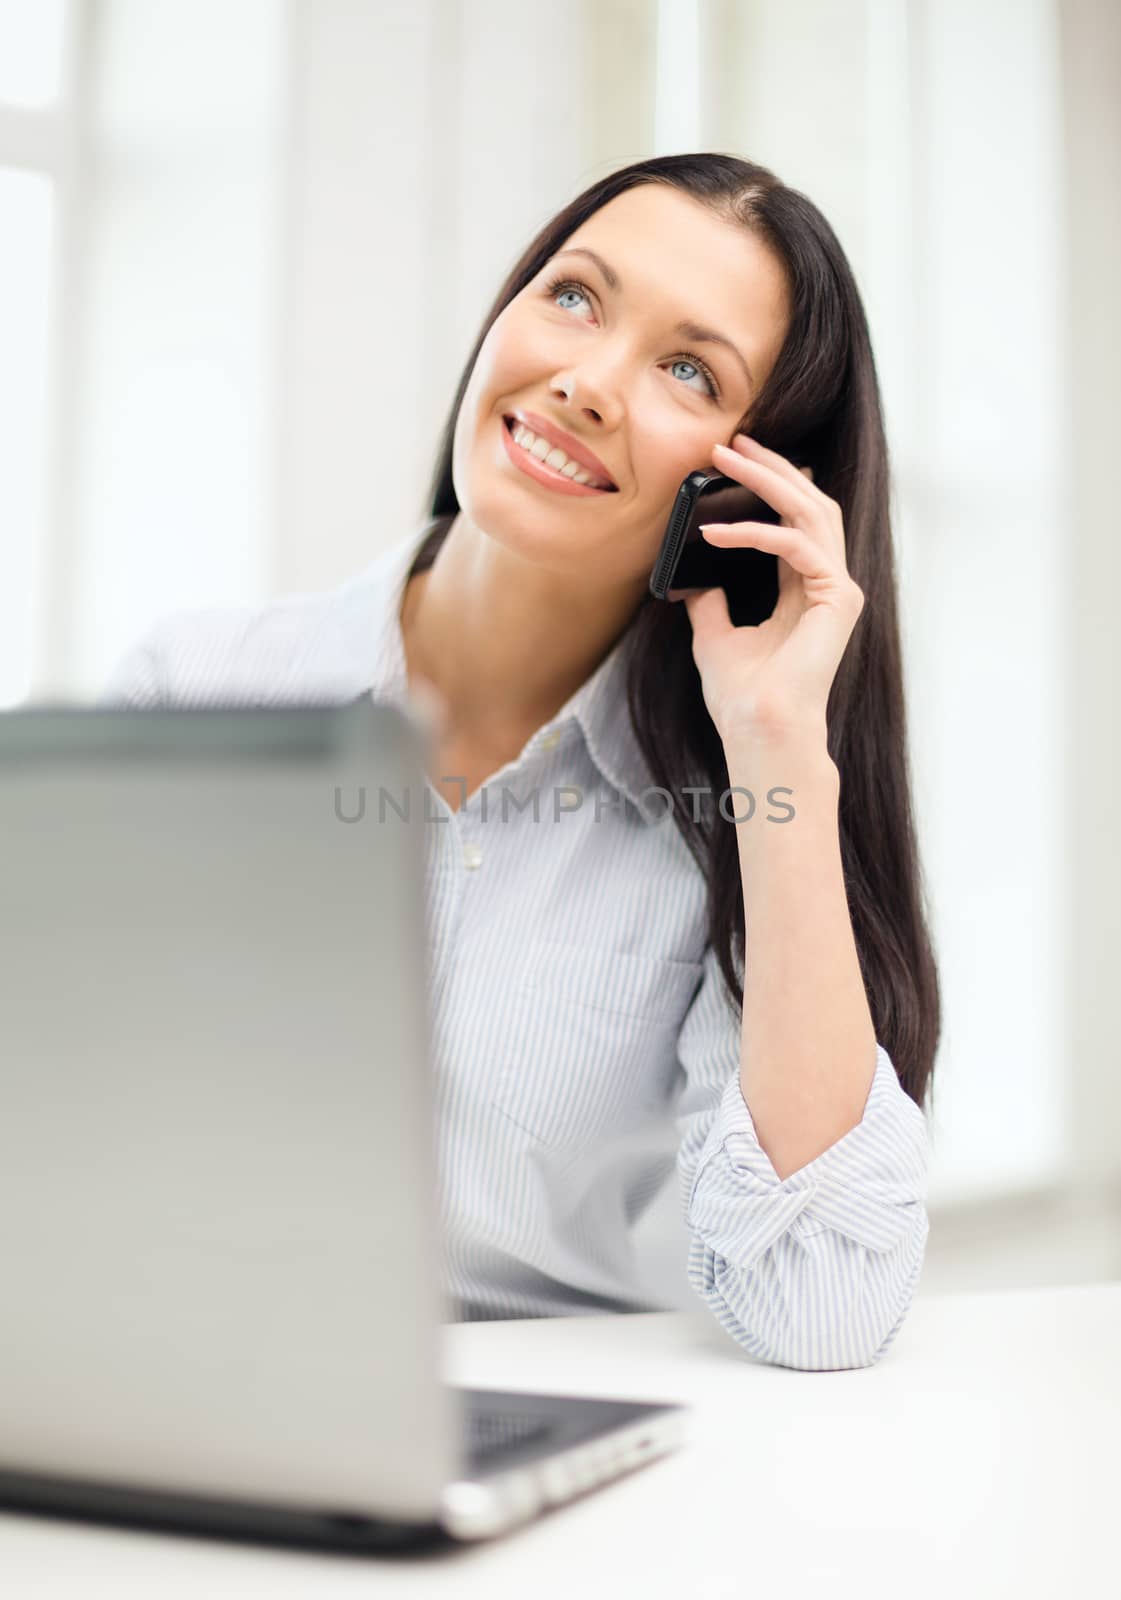 education, business and technology concept - smiling businesswoman or student with laptop computer and smartphone